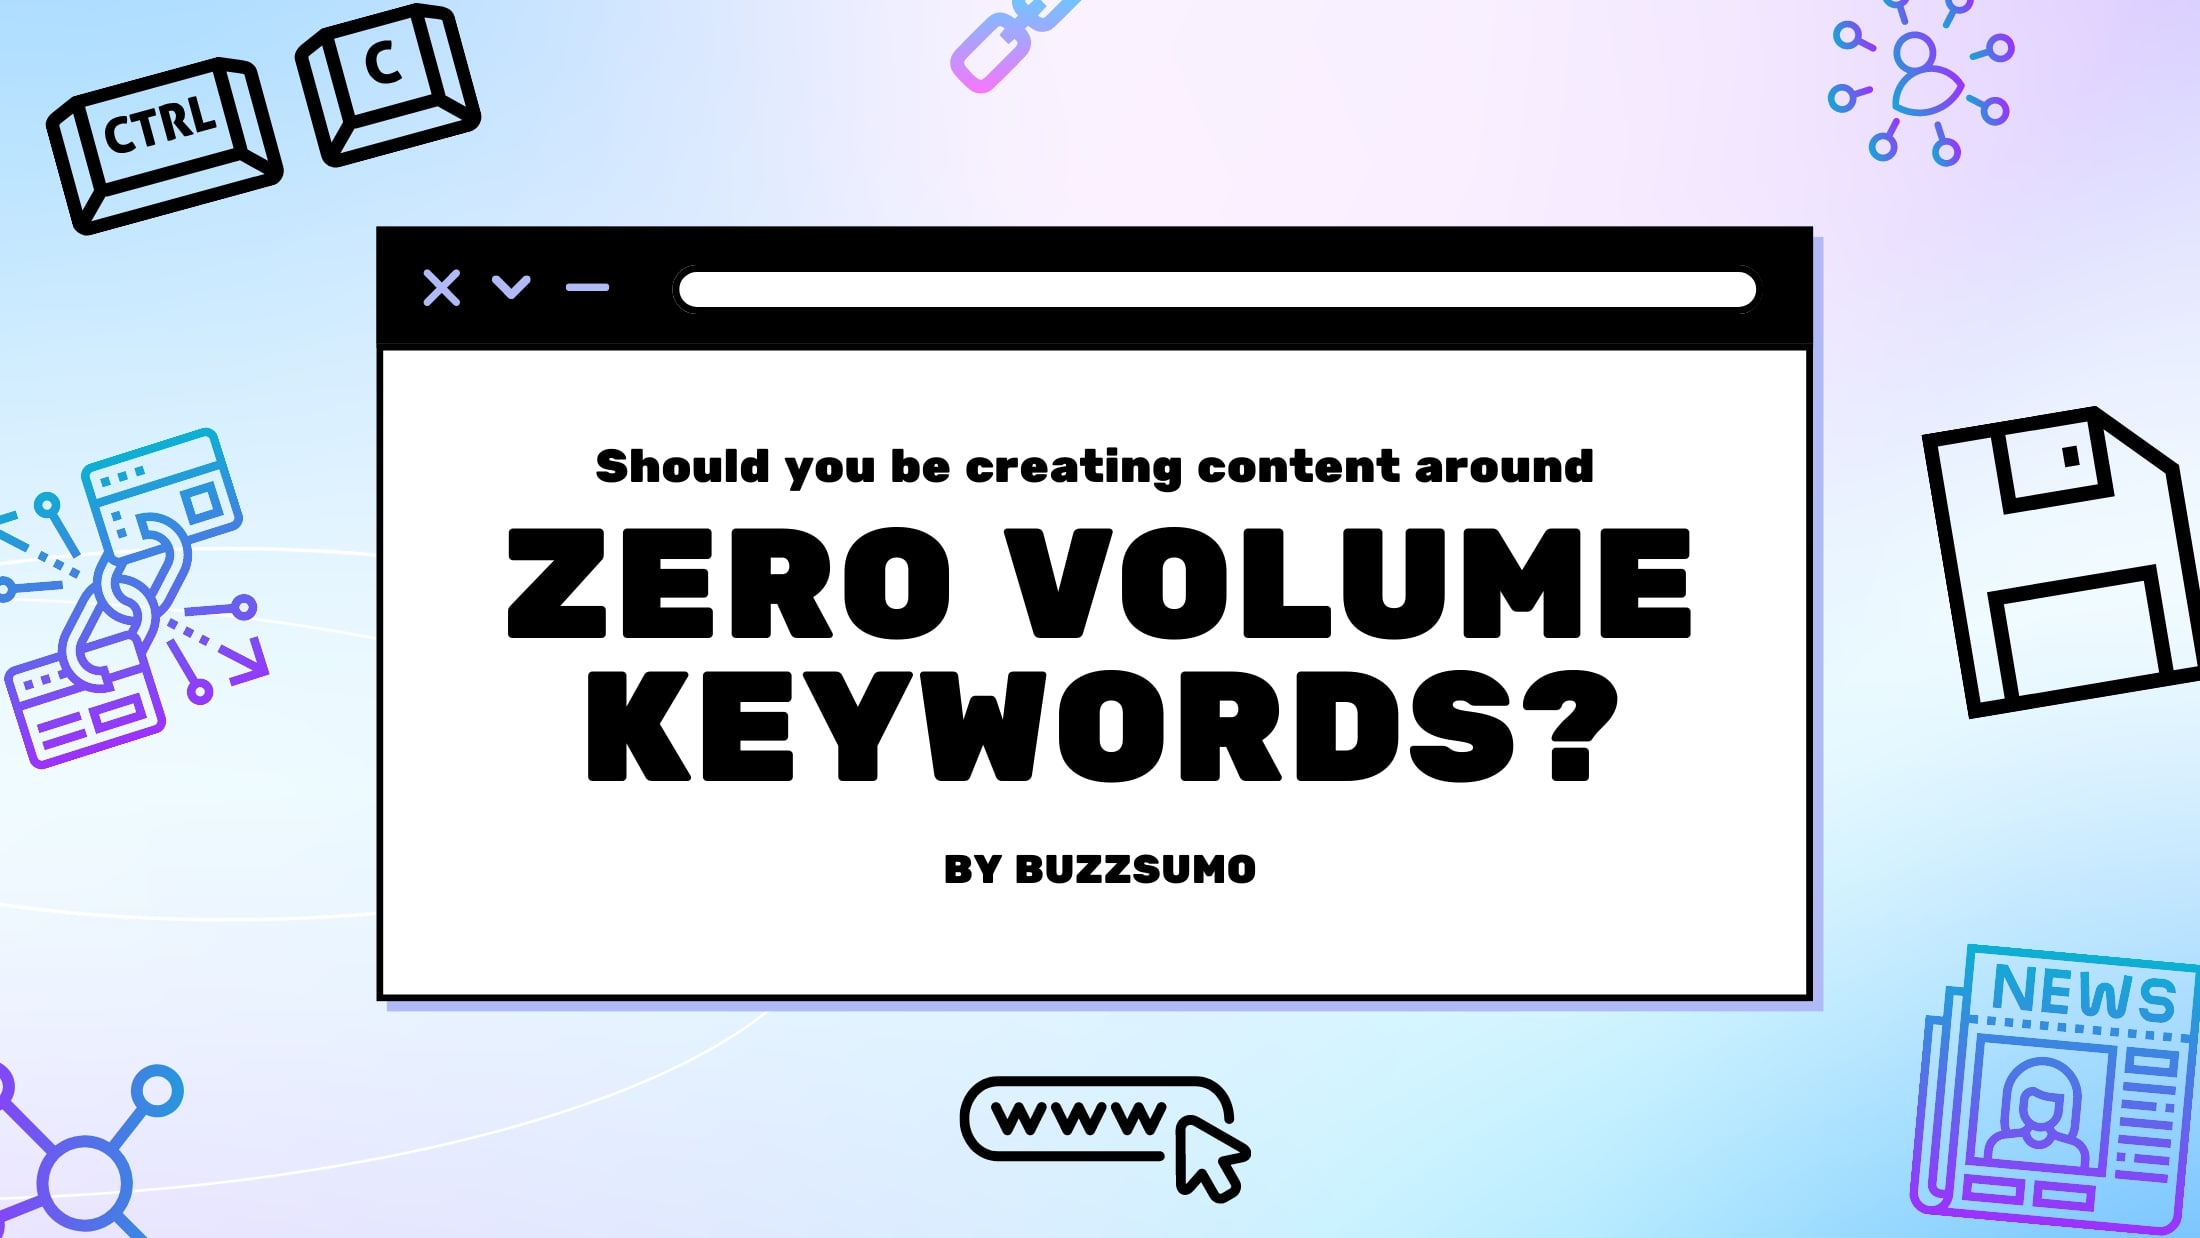 Should you be creating content around low or zero-volume keywords?